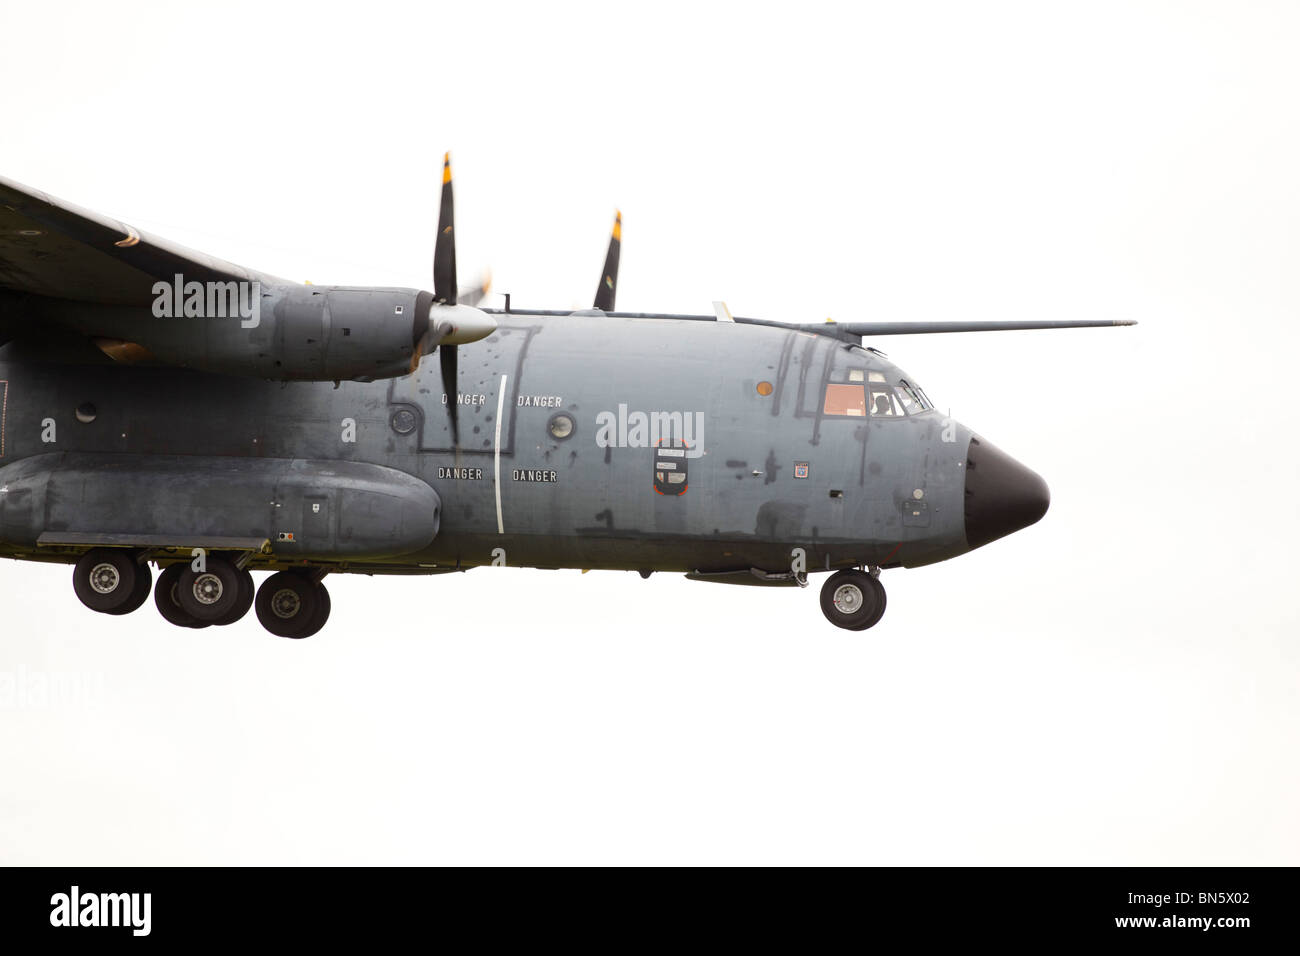 French Armee de L'air Transall C160 transport from Escadron de Transport 64 at RAF Waddington Airshow - arrivals 02 July 2010 Stock Photo